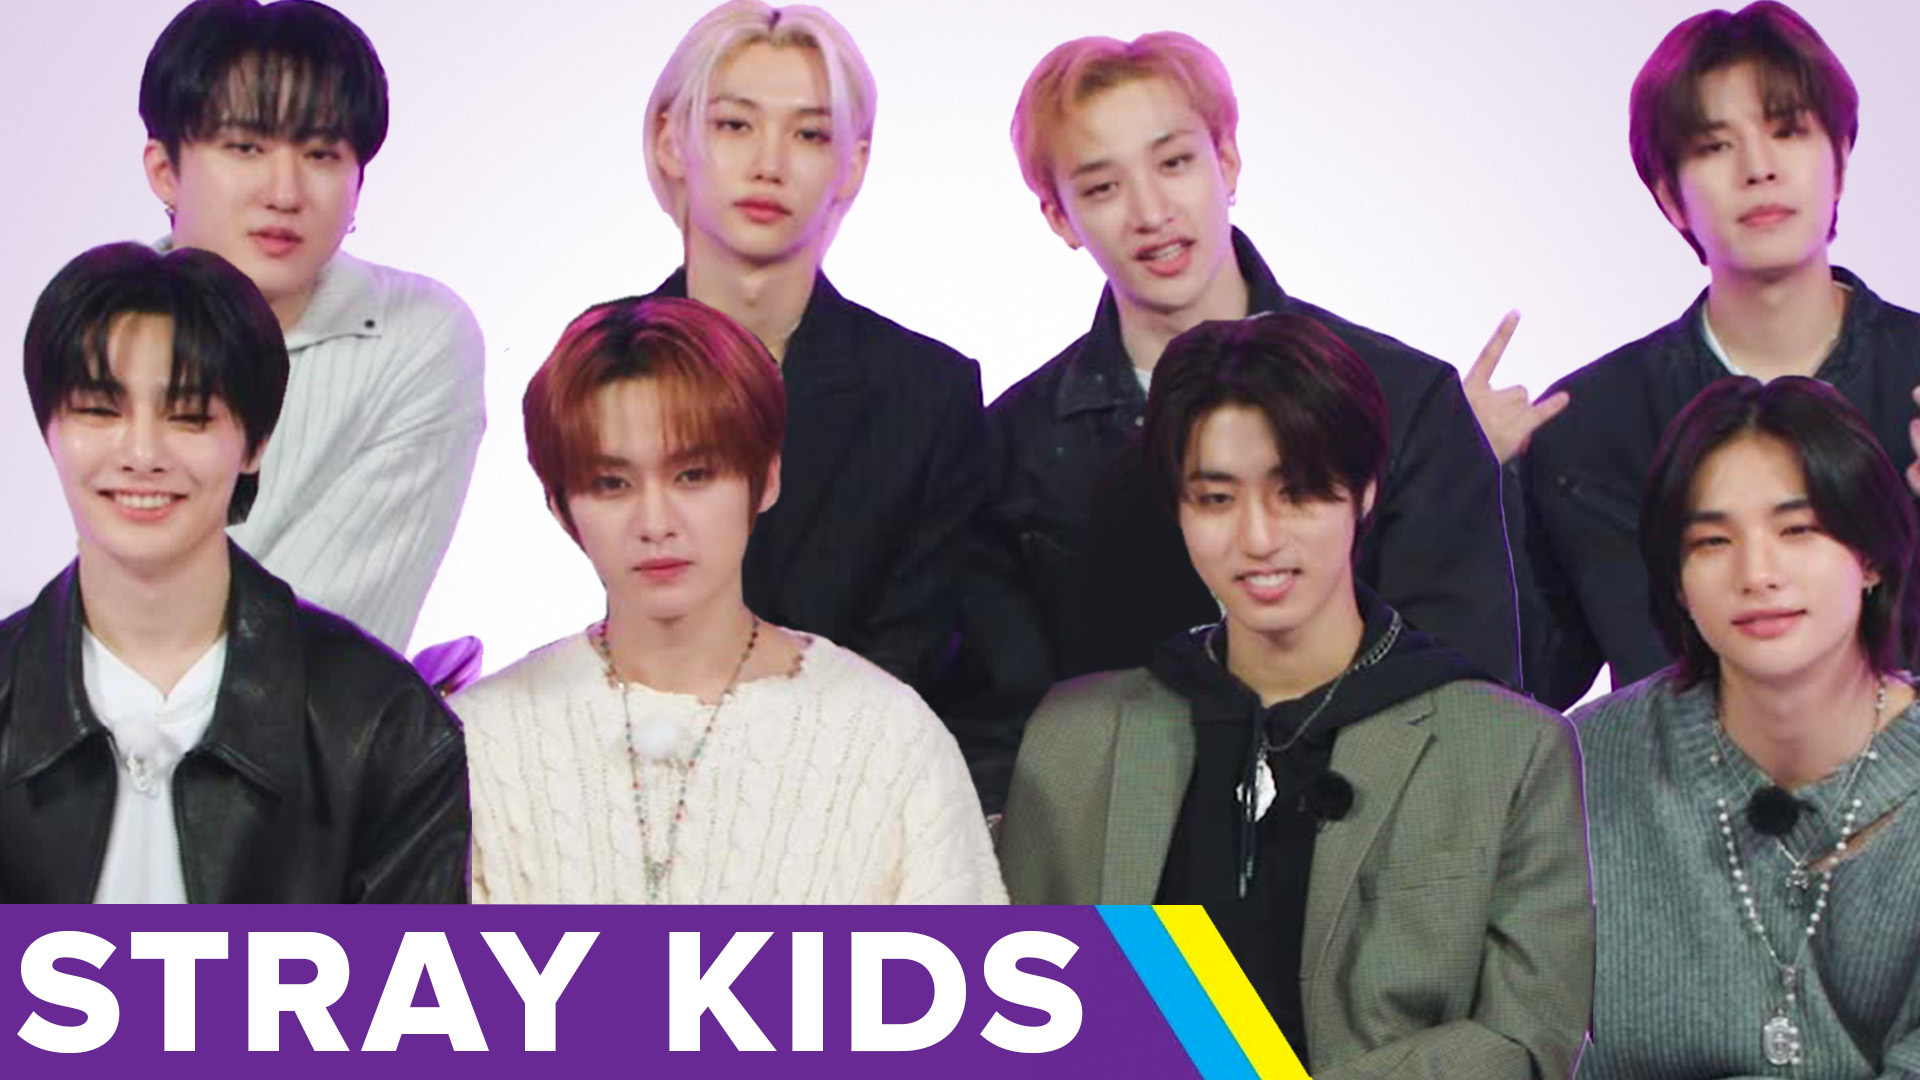 Stray Kids bring their cool, youthful K-pop vibe